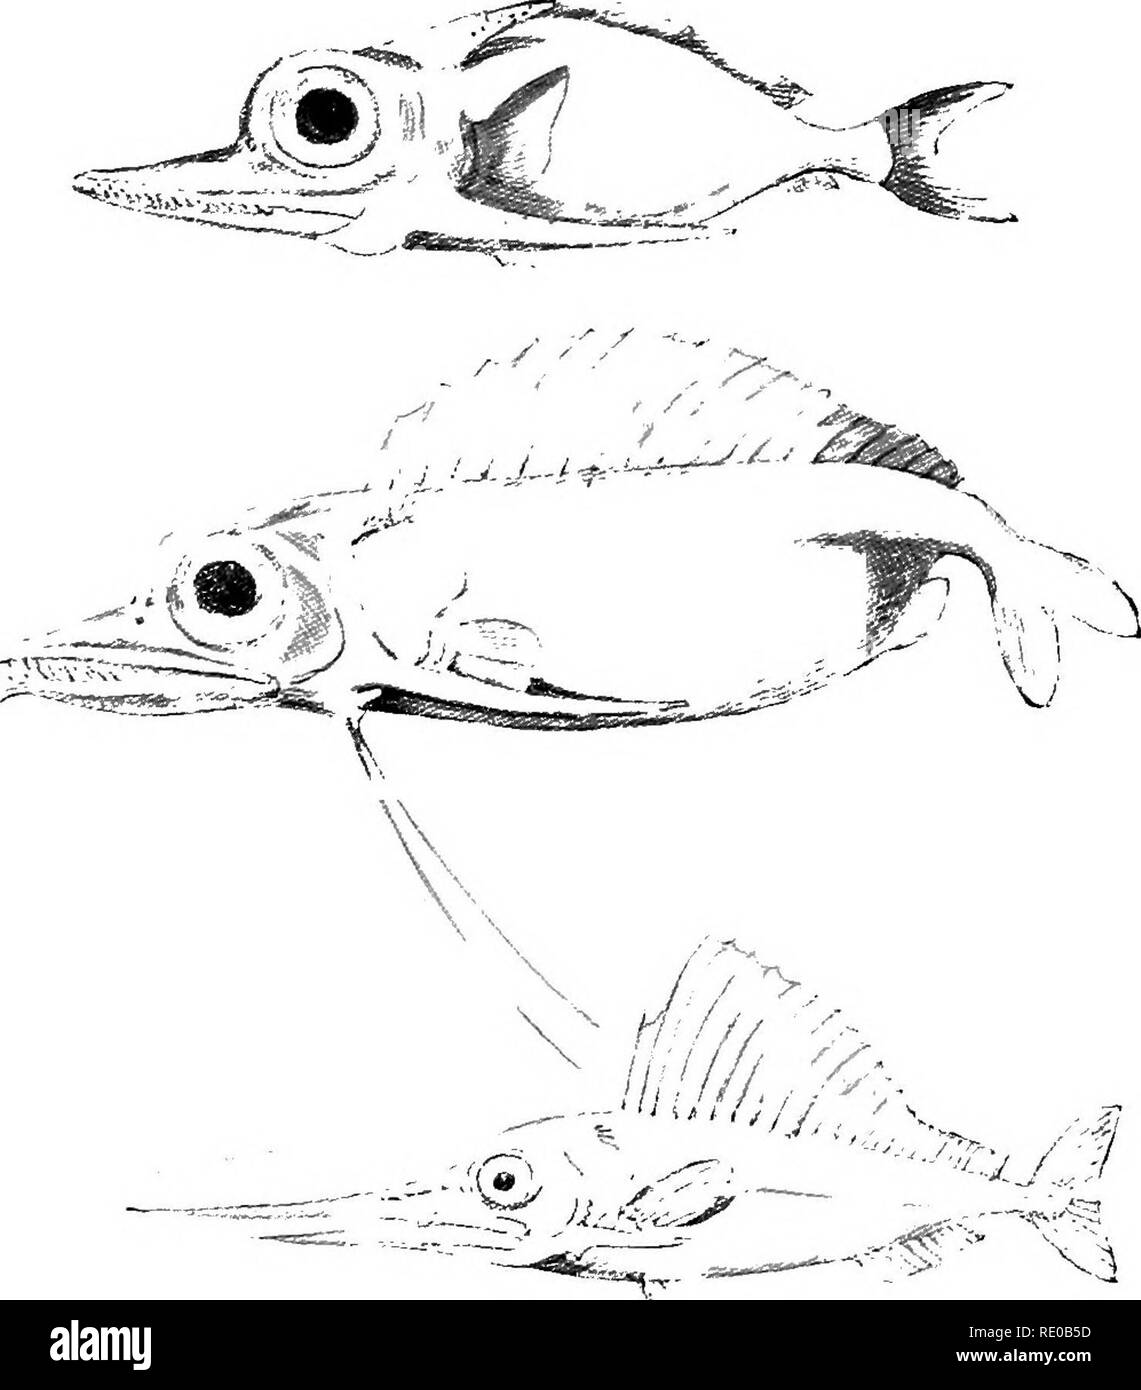 The infancy of animals. Animal behavior; Natural history. YOUNG SWORD-FISH  (after Giinther). In the size of the eye, the spines which project  backwards from, the head, and in the development of